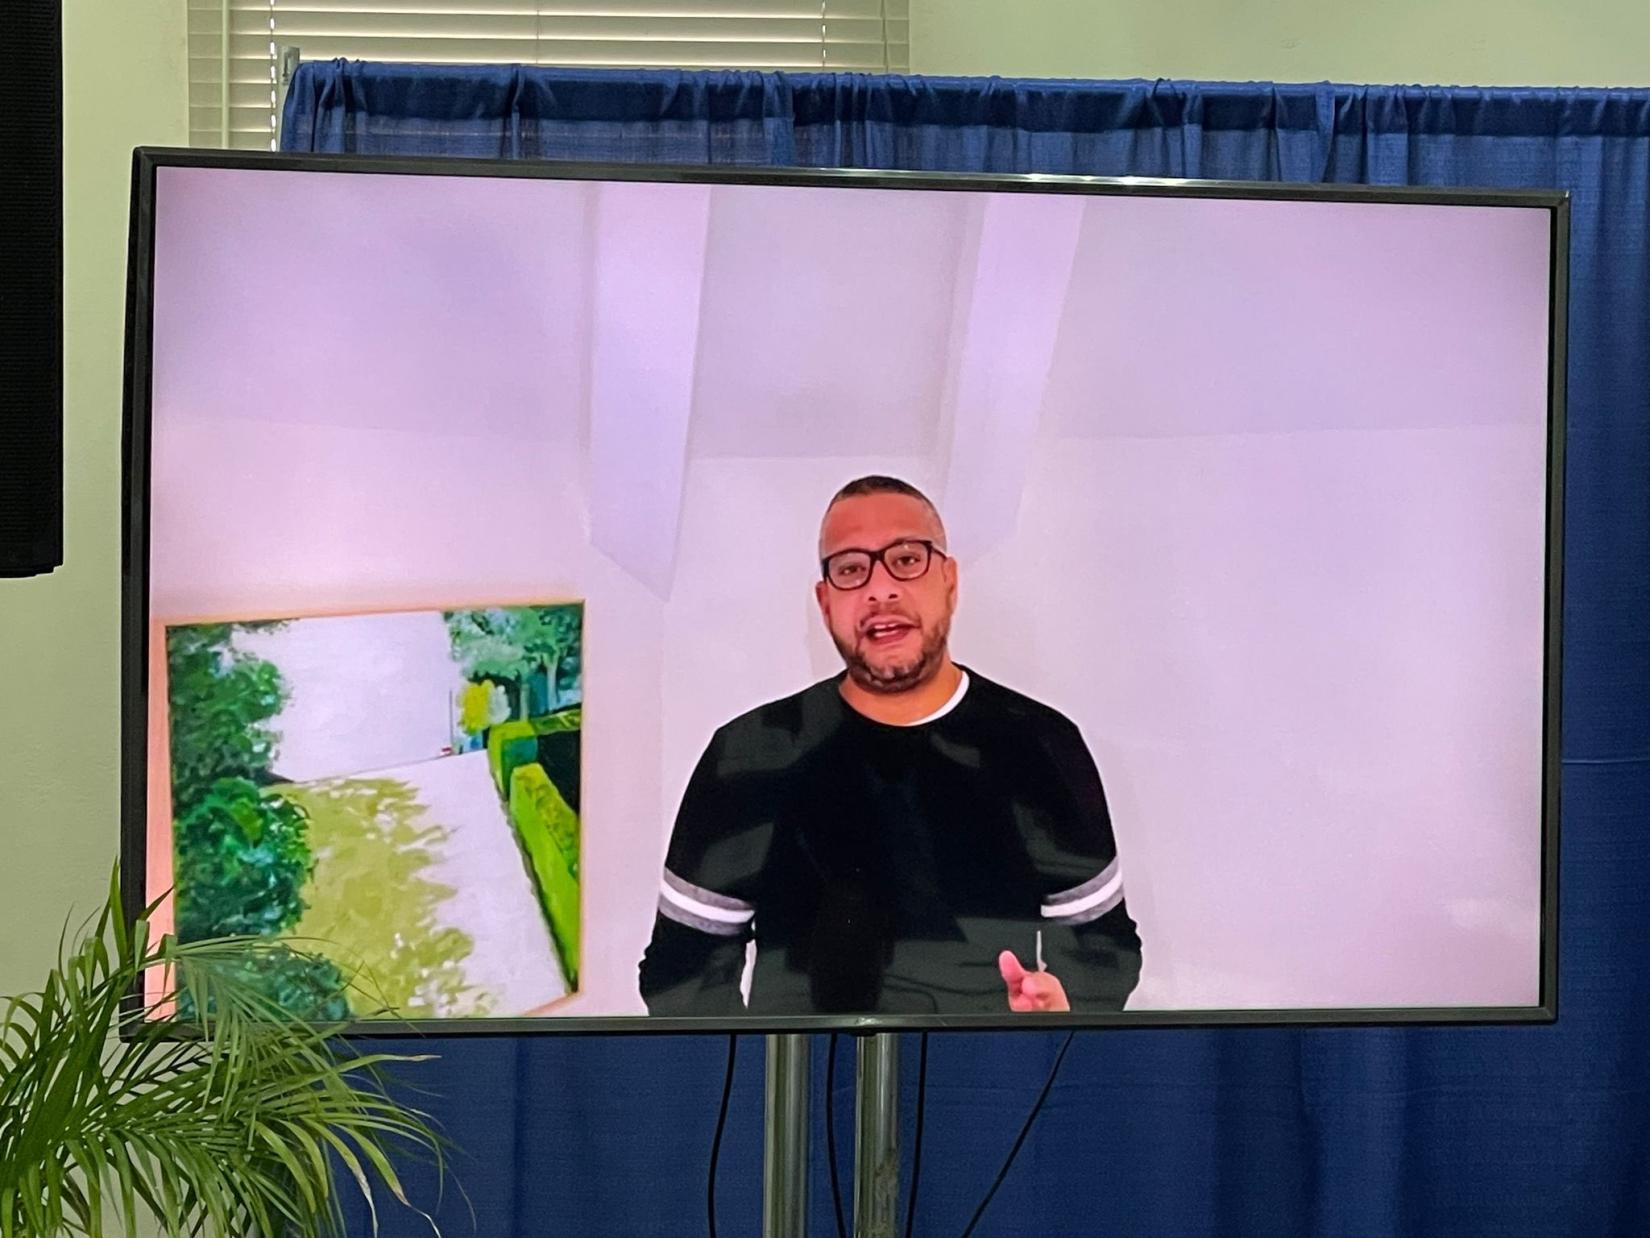 A man in glasses on a television screen talking